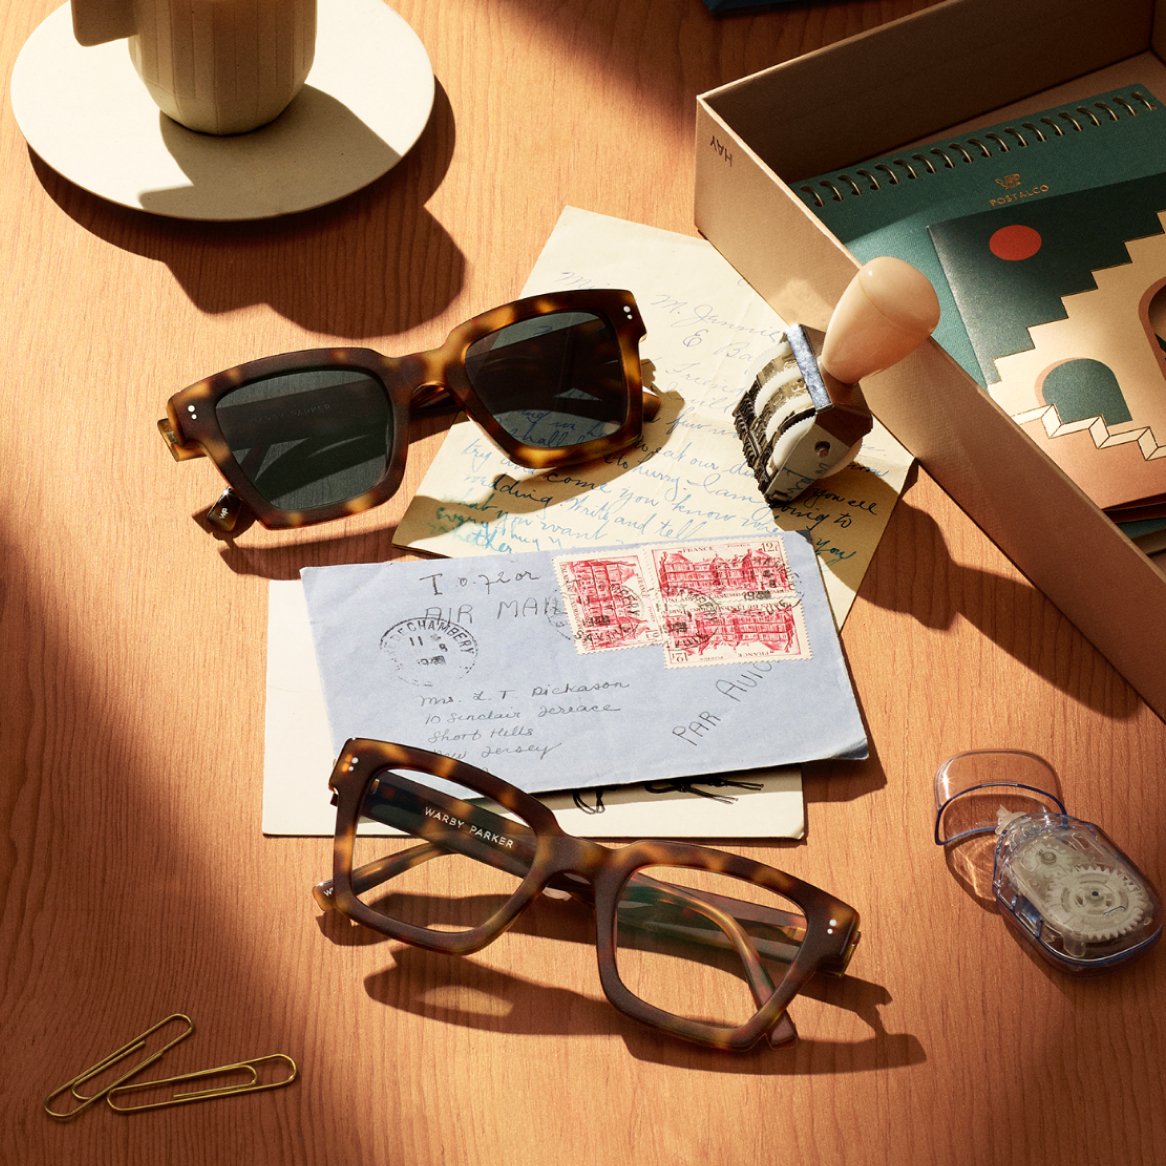 A pair of glasses and a pair of sunglasses on a table with international mail